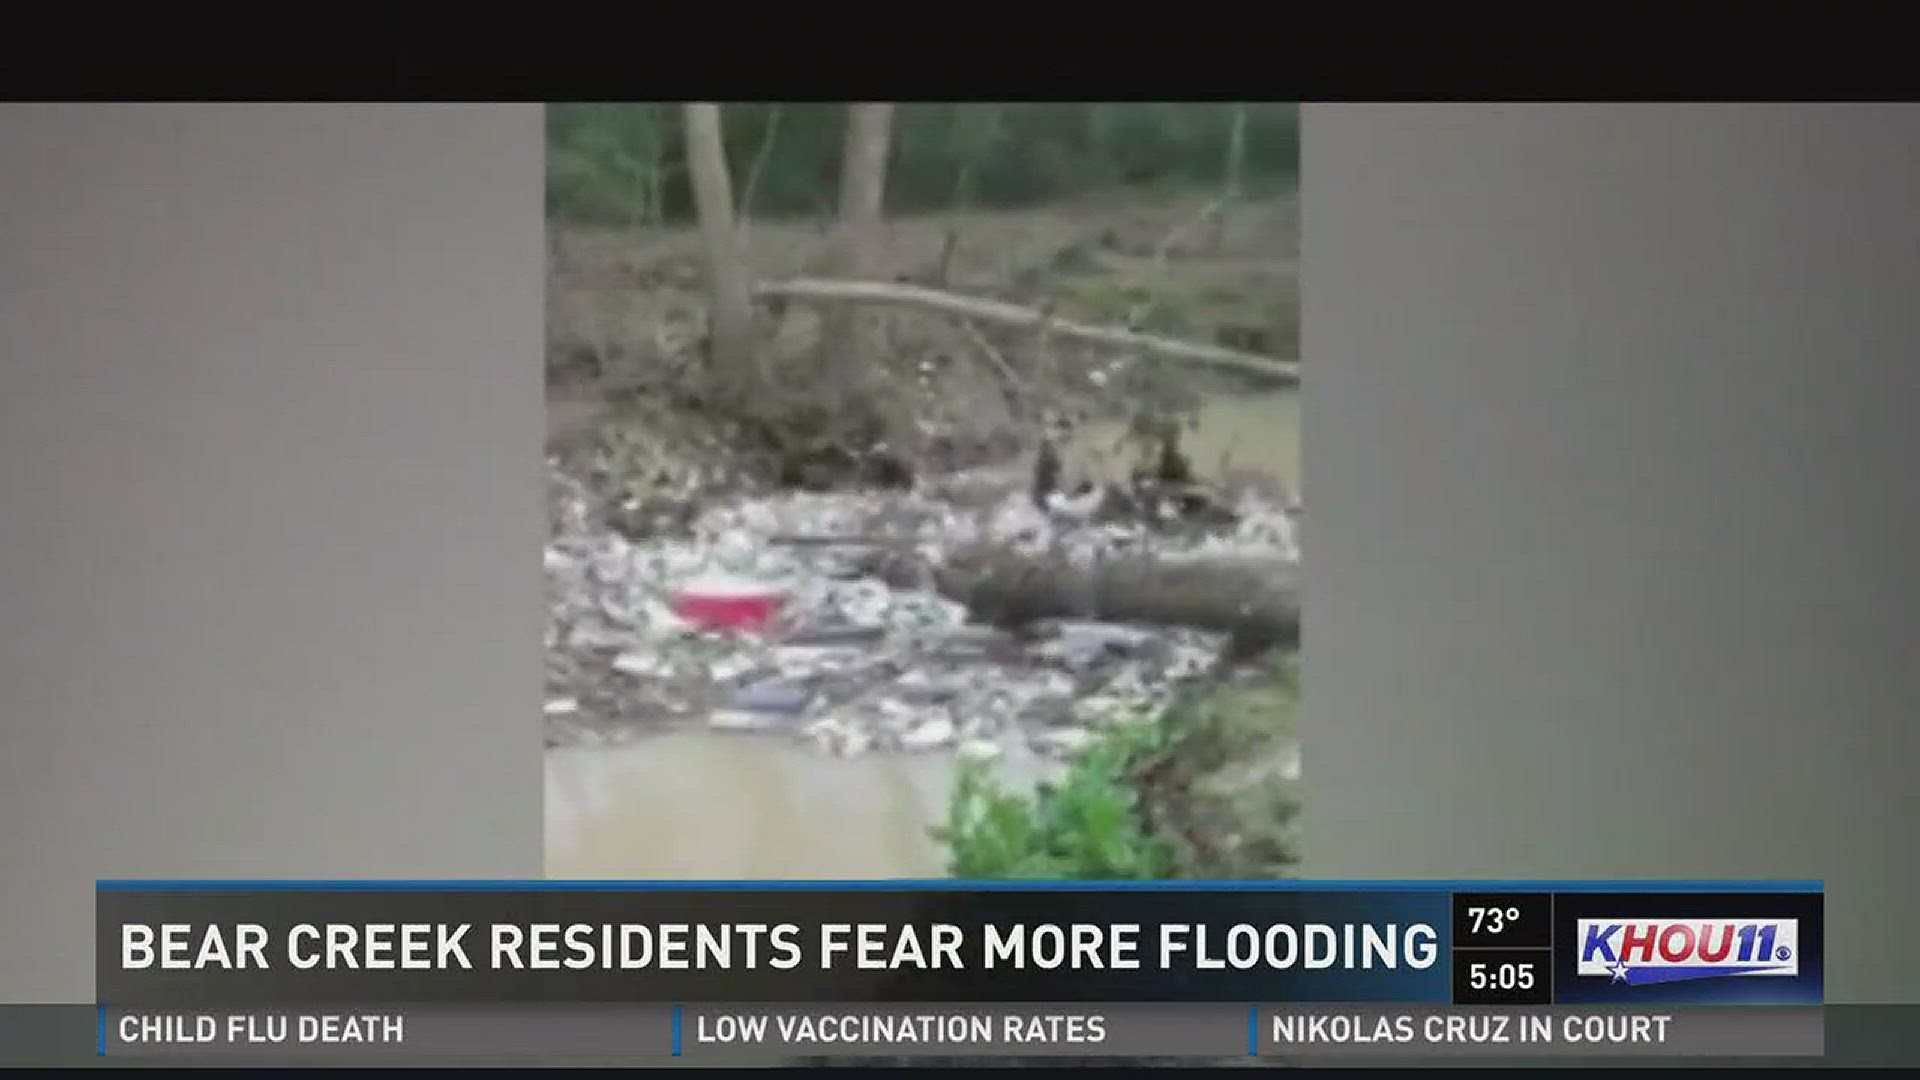 Nearly six months after Harvey, some victims in the hard-hit Bear Creek area of west Harris County say they're worried it's only a matter of time before their homes flood again.